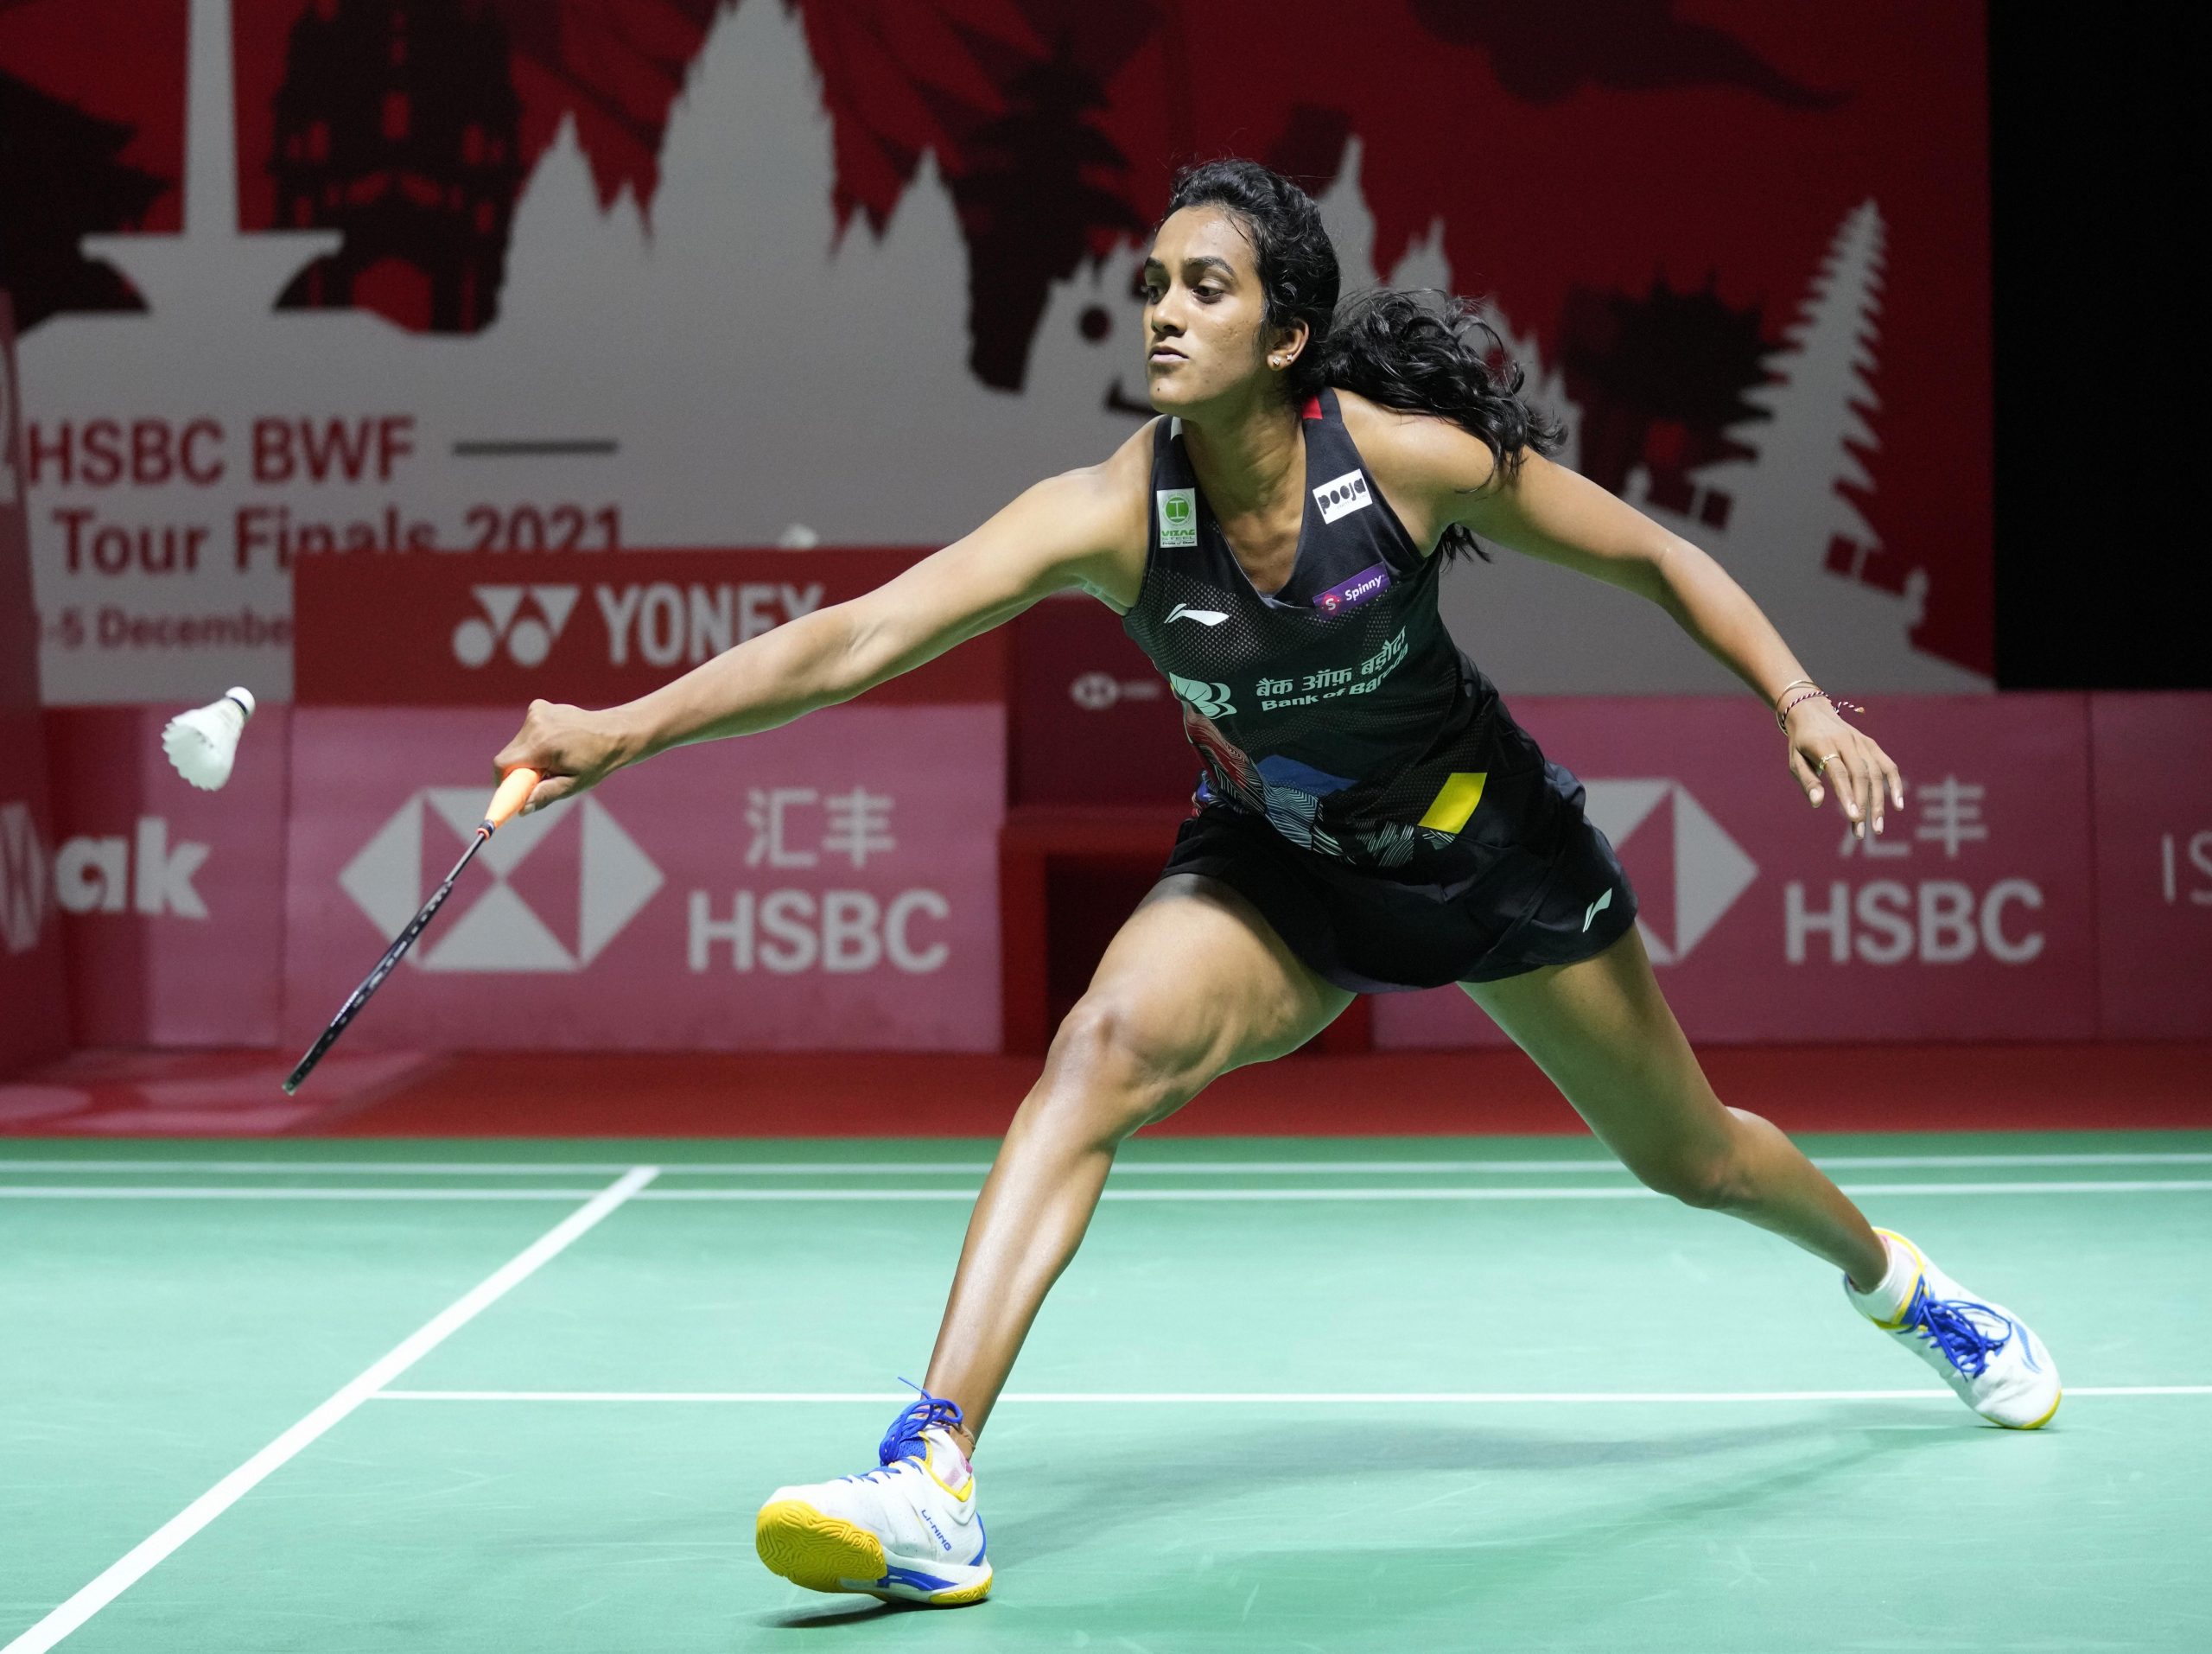 World Tour Finals: PV Sindhu loses in summit clash, takes home silver medal